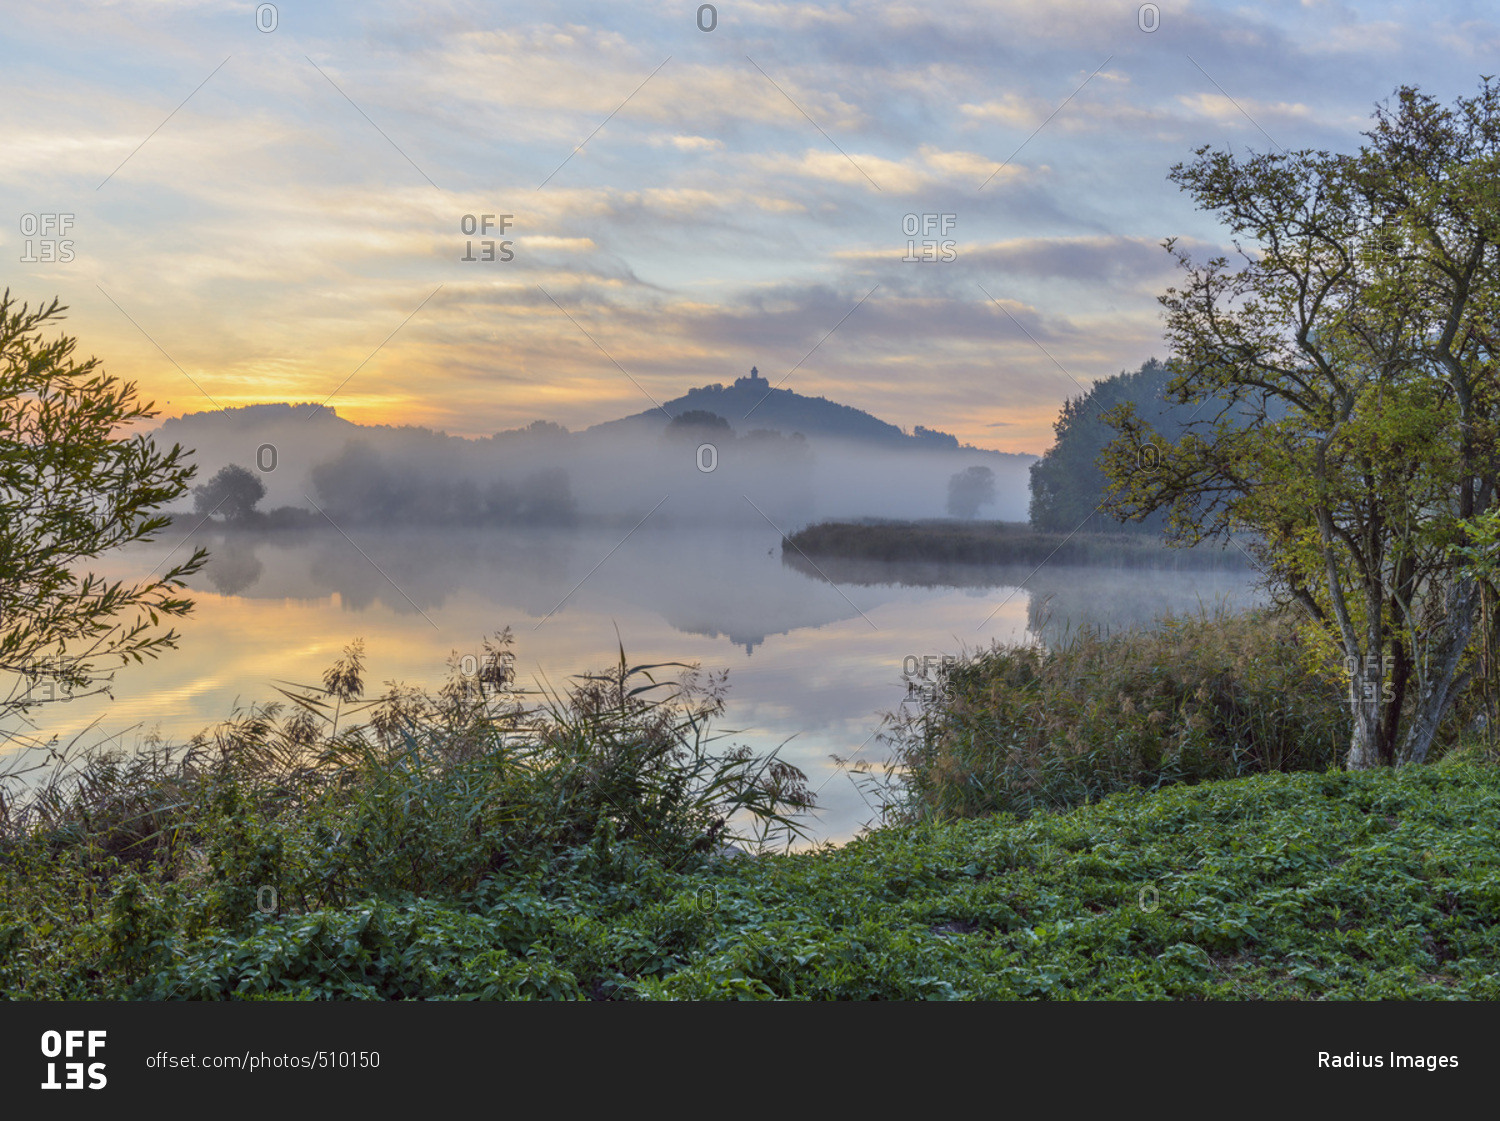 Landscape at Sunrise with Wachsenburg Castle and Lake in Morning Mist, Drei Gleichen, Ilm District, Thuringia, Germany